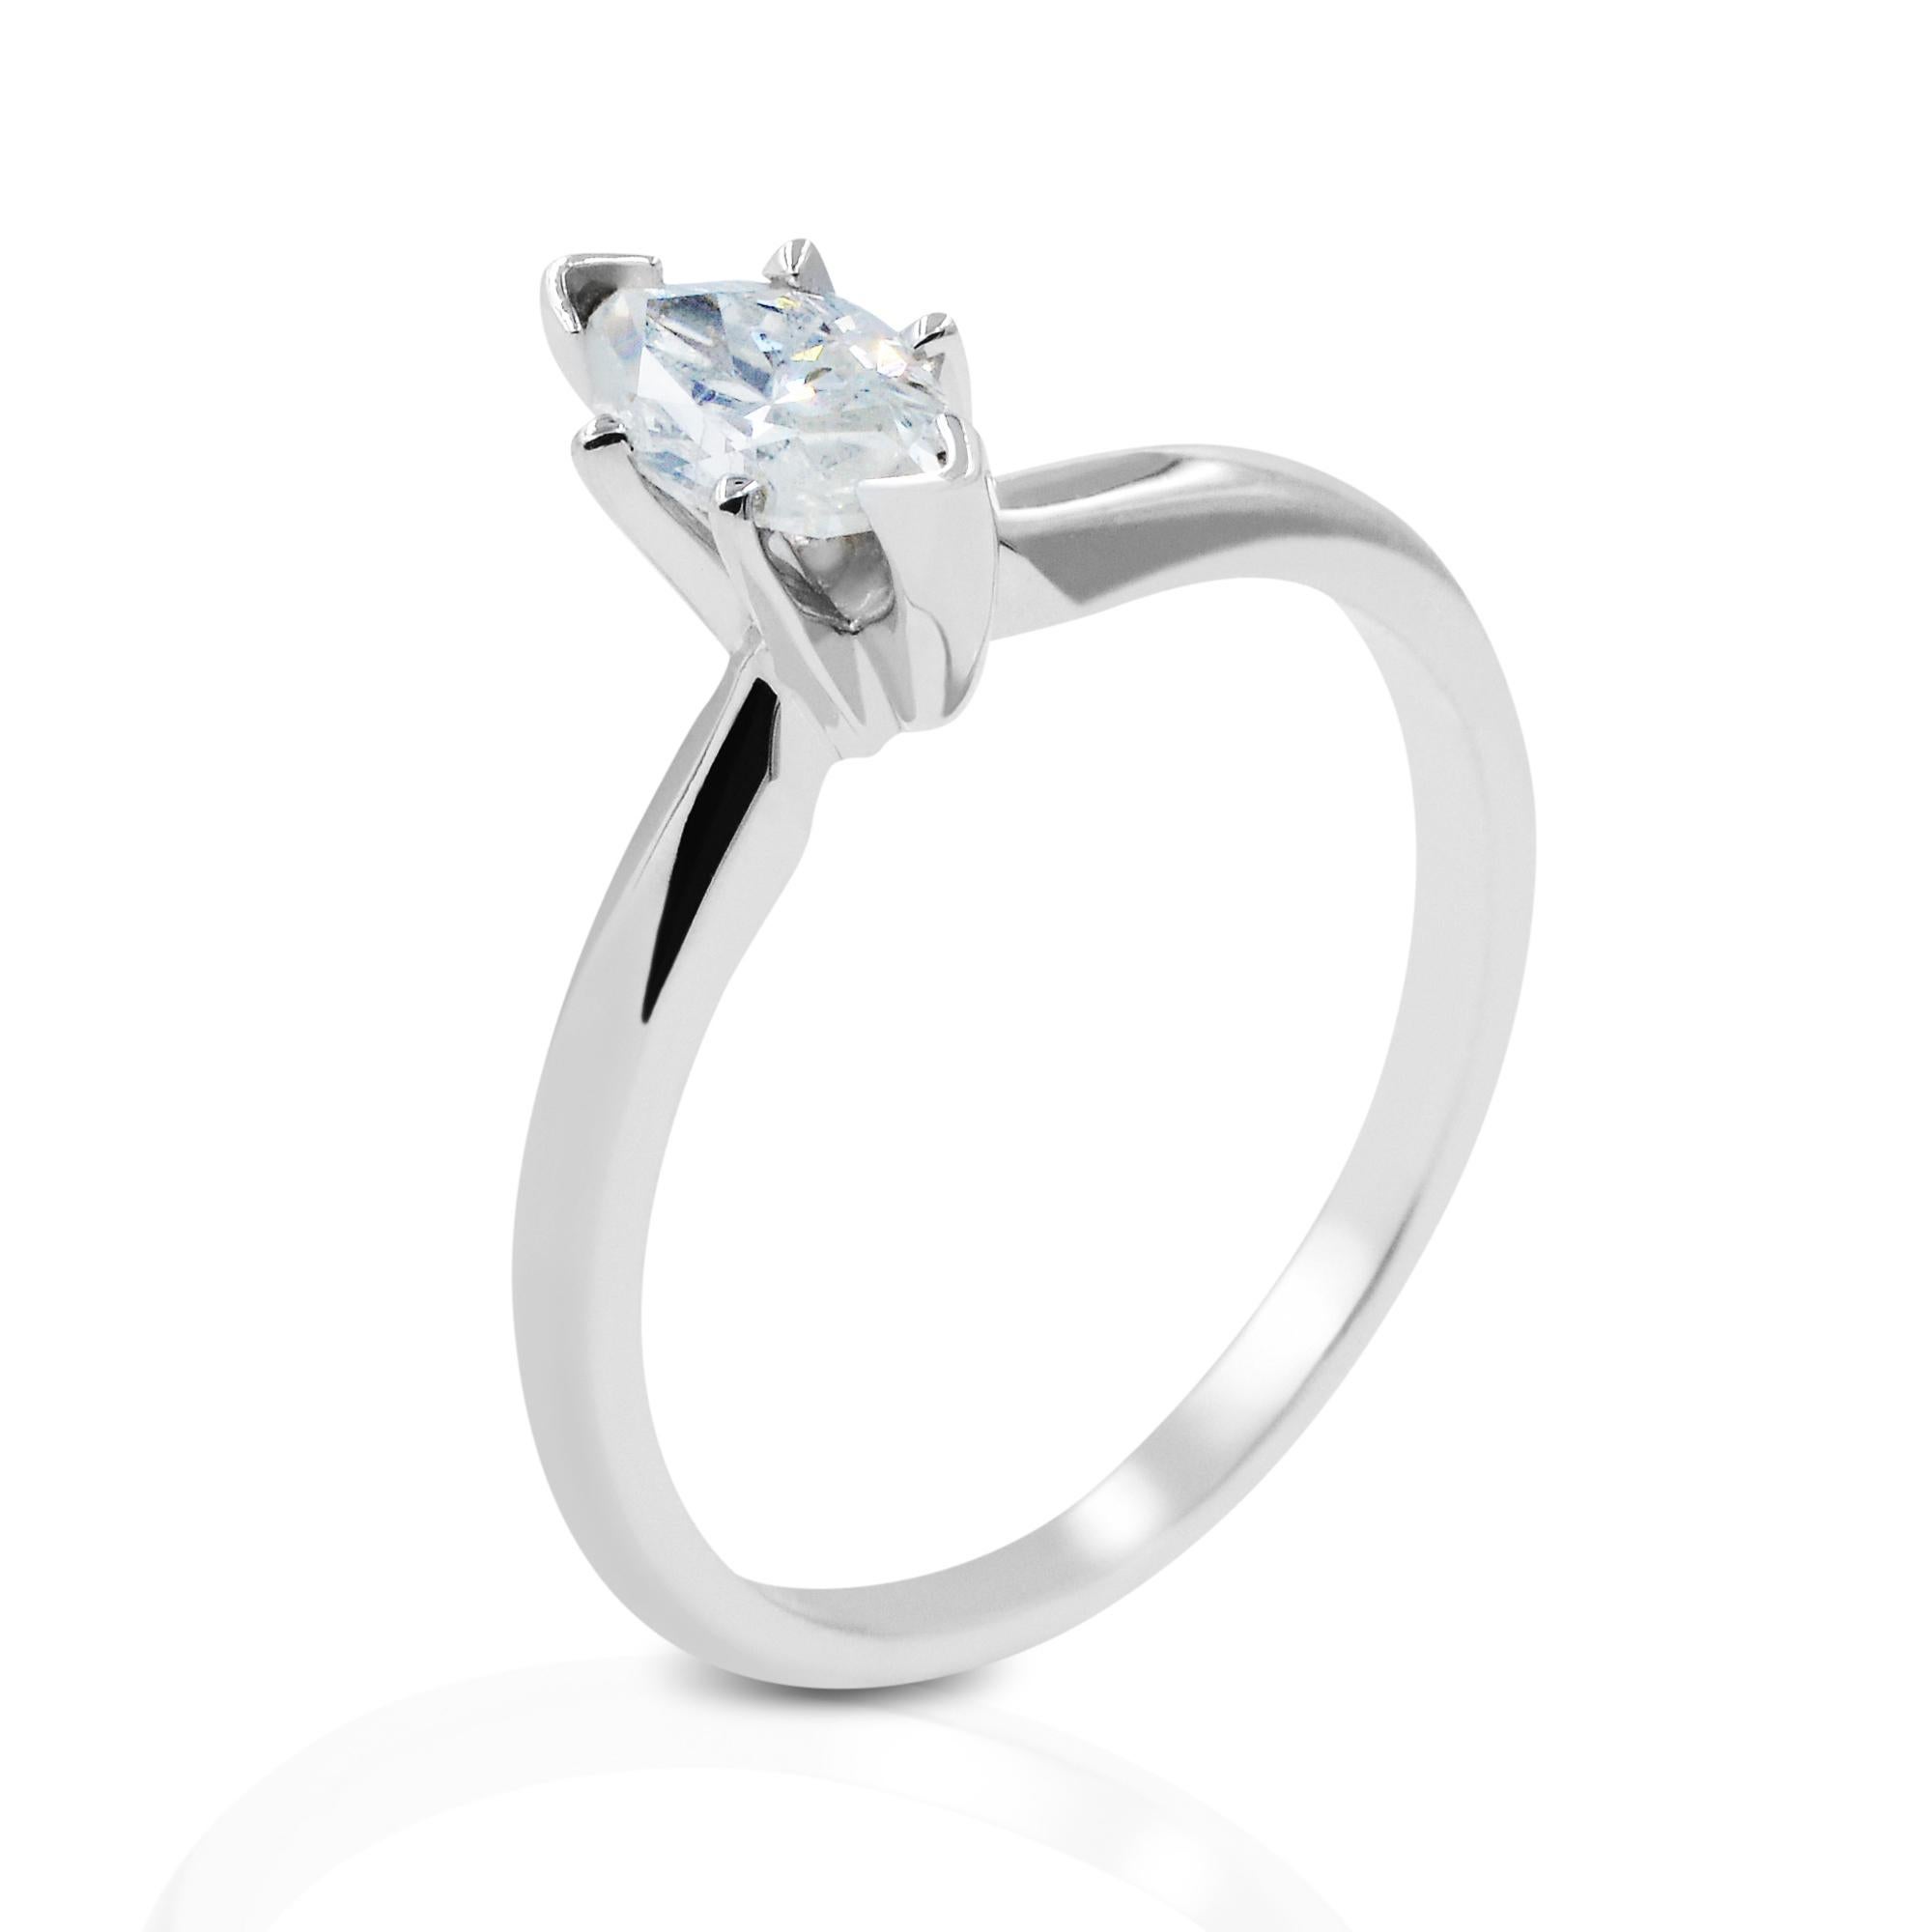 This simple and stunning solitaire engagement ring features a prong set marquise cut diamond weighing 0.62ct, encrusted in 14k white gold. The white gold is rhodium finished giving this design the look of platinum. Diamond quality: G-H color and